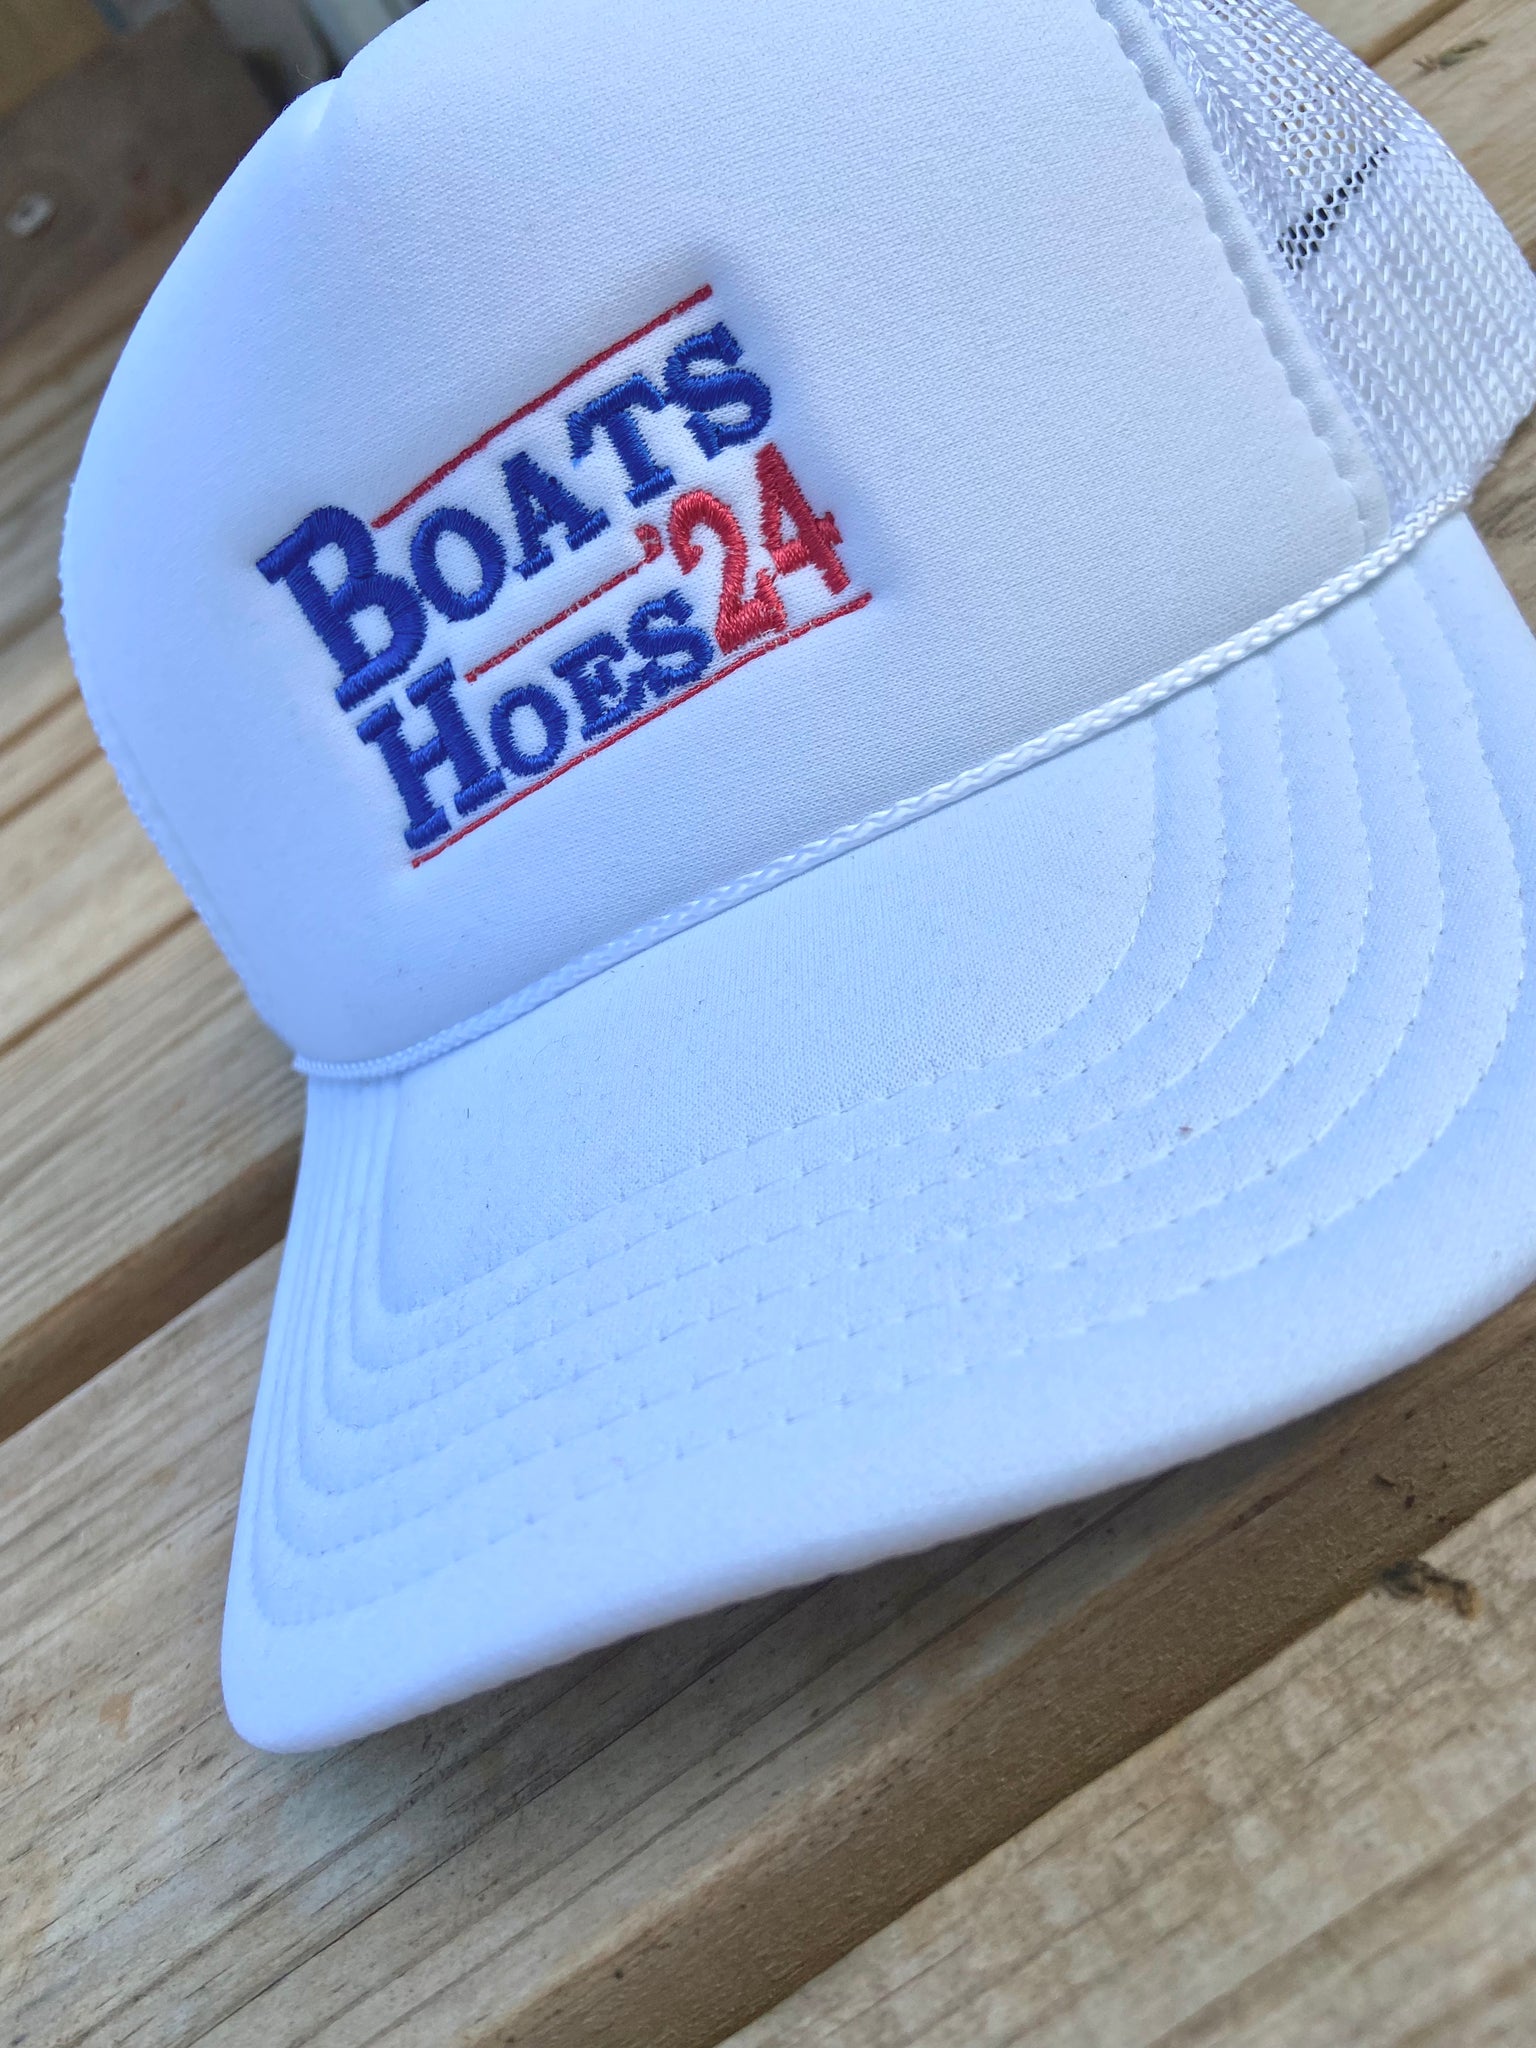 Boats hoes '24 white embroidered trucker hat – Gunpowder and Lace Boutique  Nac